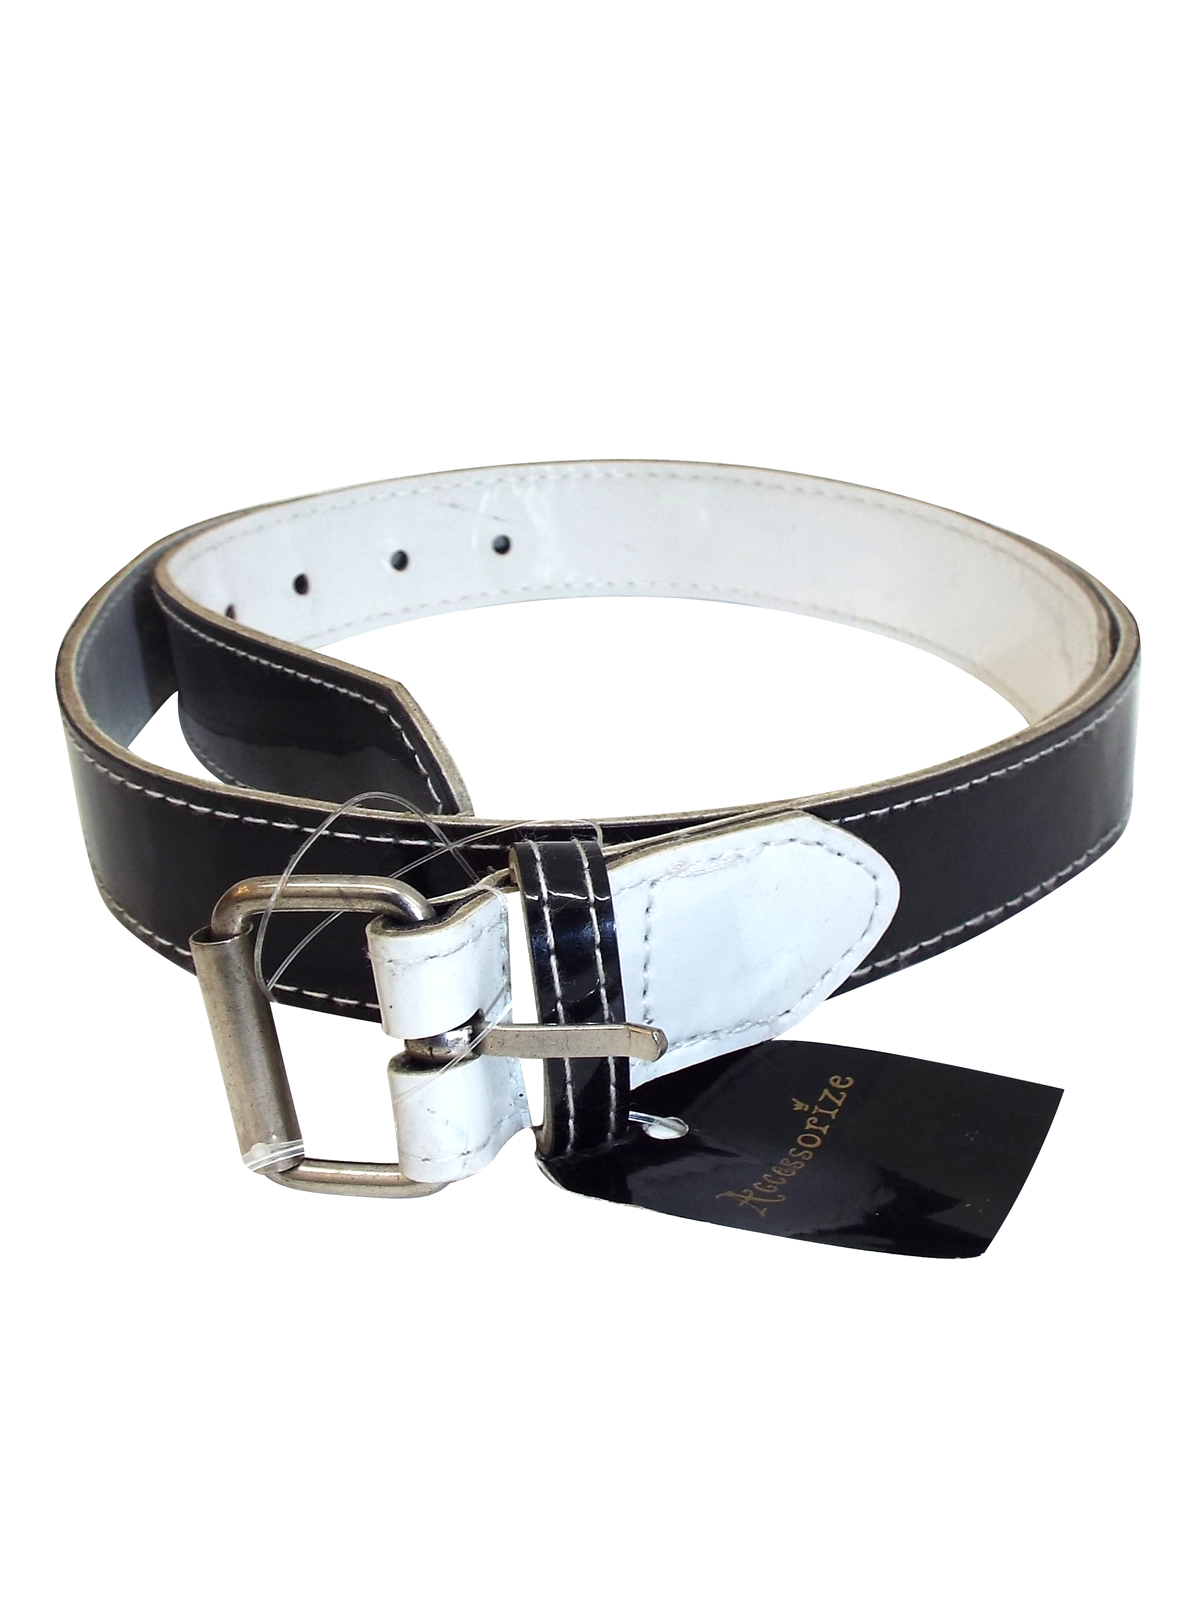 Accessorize BLACK Contrast Trim Patent Belt - Size Small to Large